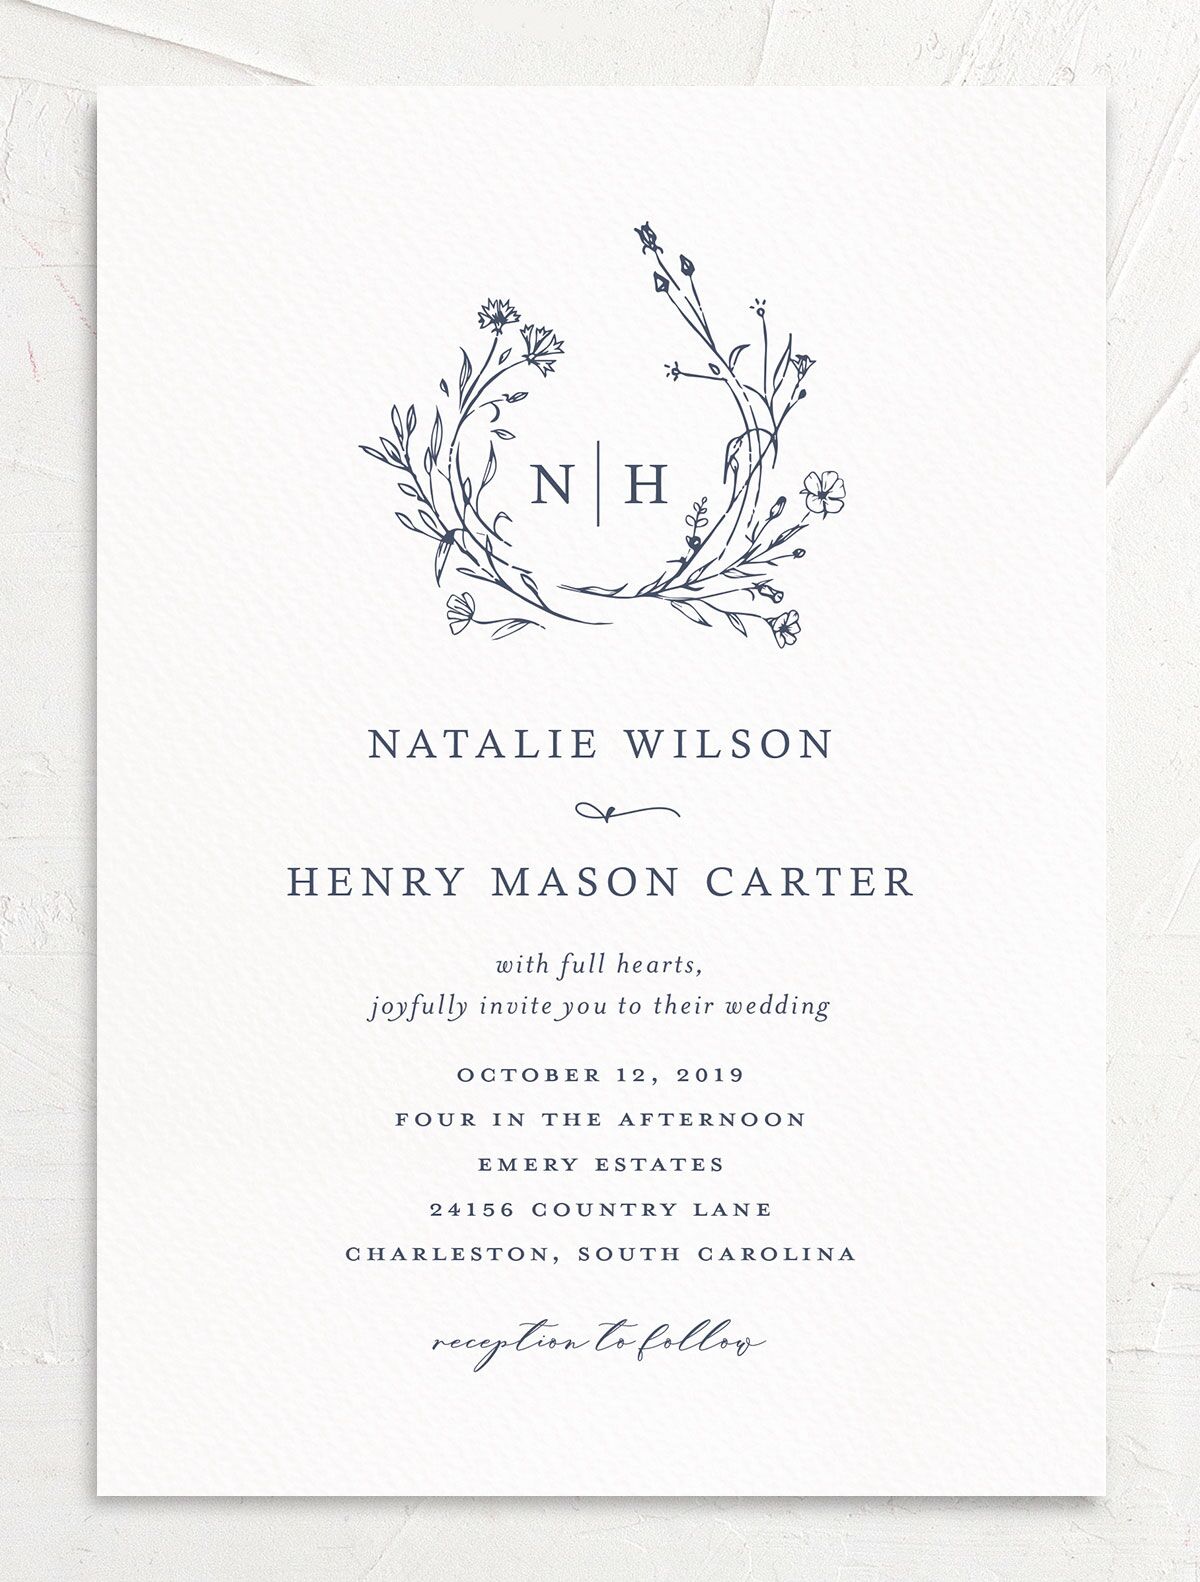 Illustrated Floral Wedding Invitations front in French Blue